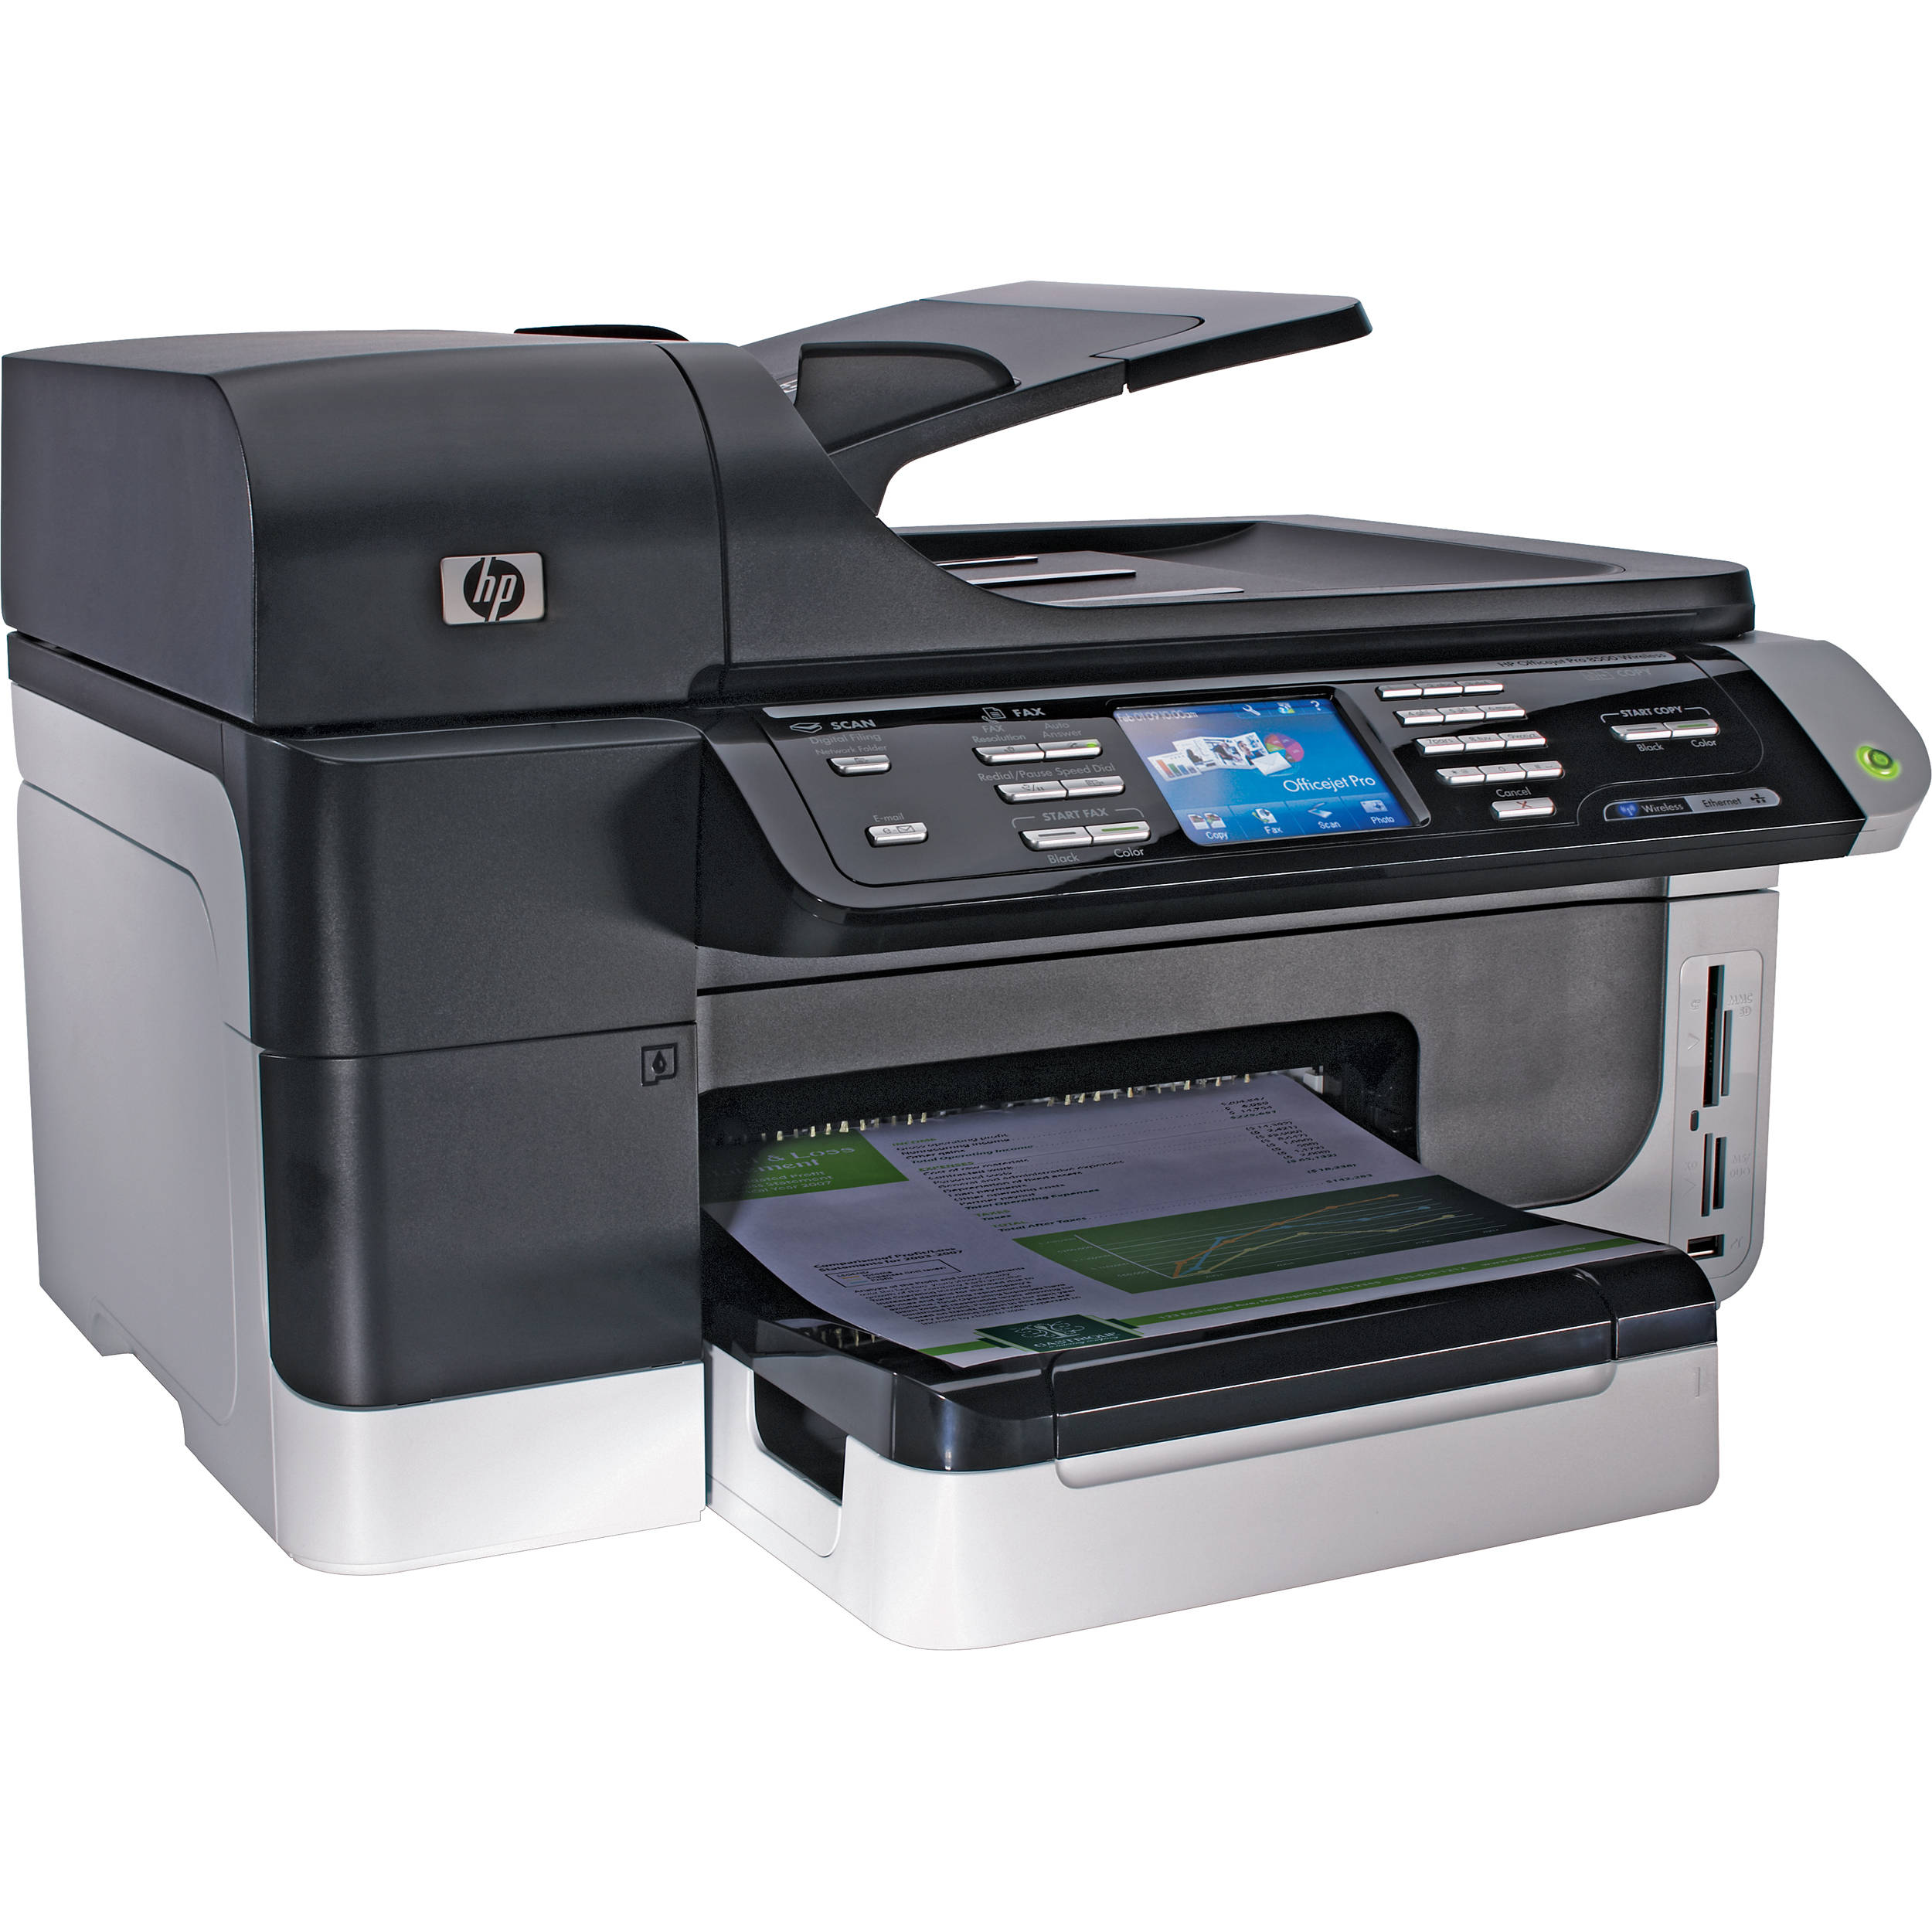 Hp Officejet Pro 8500 Wireless All In One Printer Cb023ab1h Bandh 5422